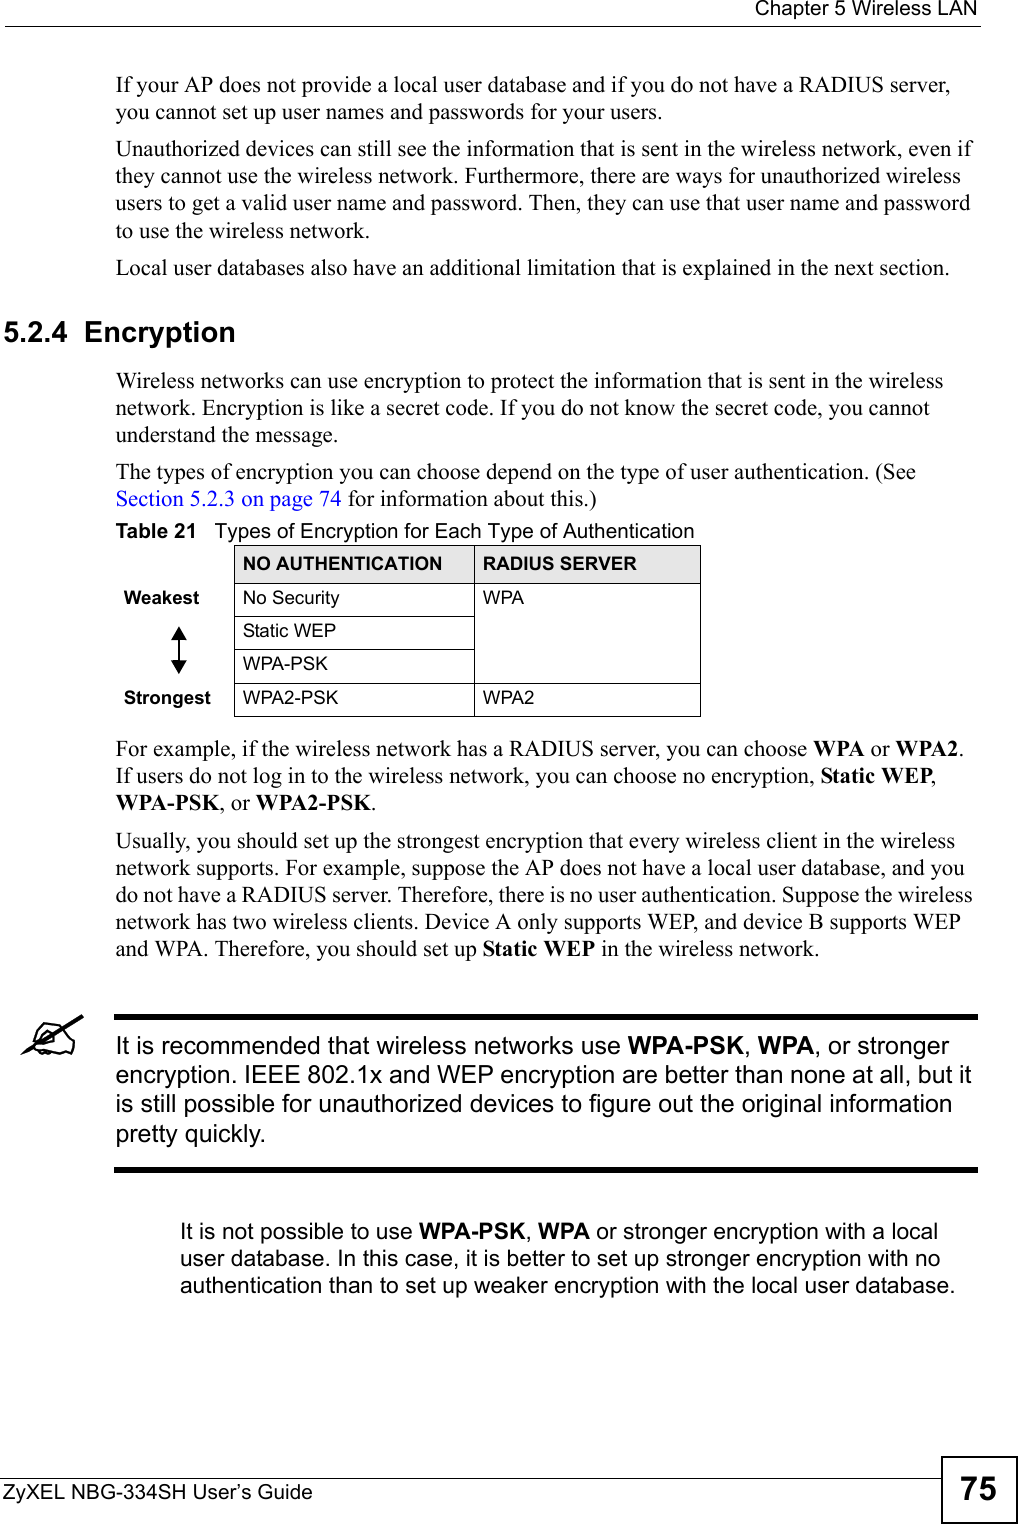  Chapter 5 Wireless LANZyXEL NBG-334SH User’s Guide 75If your AP does not provide a local user database and if you do not have a RADIUS server, you cannot set up user names and passwords for your users.Unauthorized devices can still see the information that is sent in the wireless network, even if they cannot use the wireless network. Furthermore, there are ways for unauthorized wireless users to get a valid user name and password. Then, they can use that user name and password to use the wireless network.Local user databases also have an additional limitation that is explained in the next section.5.2.4  EncryptionWireless networks can use encryption to protect the information that is sent in the wireless network. Encryption is like a secret code. If you do not know the secret code, you cannot understand the message.The types of encryption you can choose depend on the type of user authentication. (See Section 5.2.3 on page 74 for information about this.)For example, if the wireless network has a RADIUS server, you can choose WPA or WPA2. If users do not log in to the wireless network, you can choose no encryption, Static WEP, WPA-PSK, or WPA2-PSK.Usually, you should set up the strongest encryption that every wireless client in the wireless network supports. For example, suppose the AP does not have a local user database, and you do not have a RADIUS server. Therefore, there is no user authentication. Suppose the wireless network has two wireless clients. Device A only supports WEP, and device B supports WEP and WPA. Therefore, you should set up Static WEP in the wireless network.&quot;It is recommended that wireless networks use WPA-PSK, WPA, or stronger encryption. IEEE 802.1x and WEP encryption are better than none at all, but it is still possible for unauthorized devices to figure out the original information pretty quickly.It is not possible to use WPA-PSK, WPA or stronger encryption with a local user database. In this case, it is better to set up stronger encryption with no authentication than to set up weaker encryption with the local user database.Table 21   Types of Encryption for Each Type of AuthenticationNO AUTHENTICATION RADIUS SERVERWeakest No Security WPAStatic WEPWPA-PSKStrongest WPA2-PSK WPA2